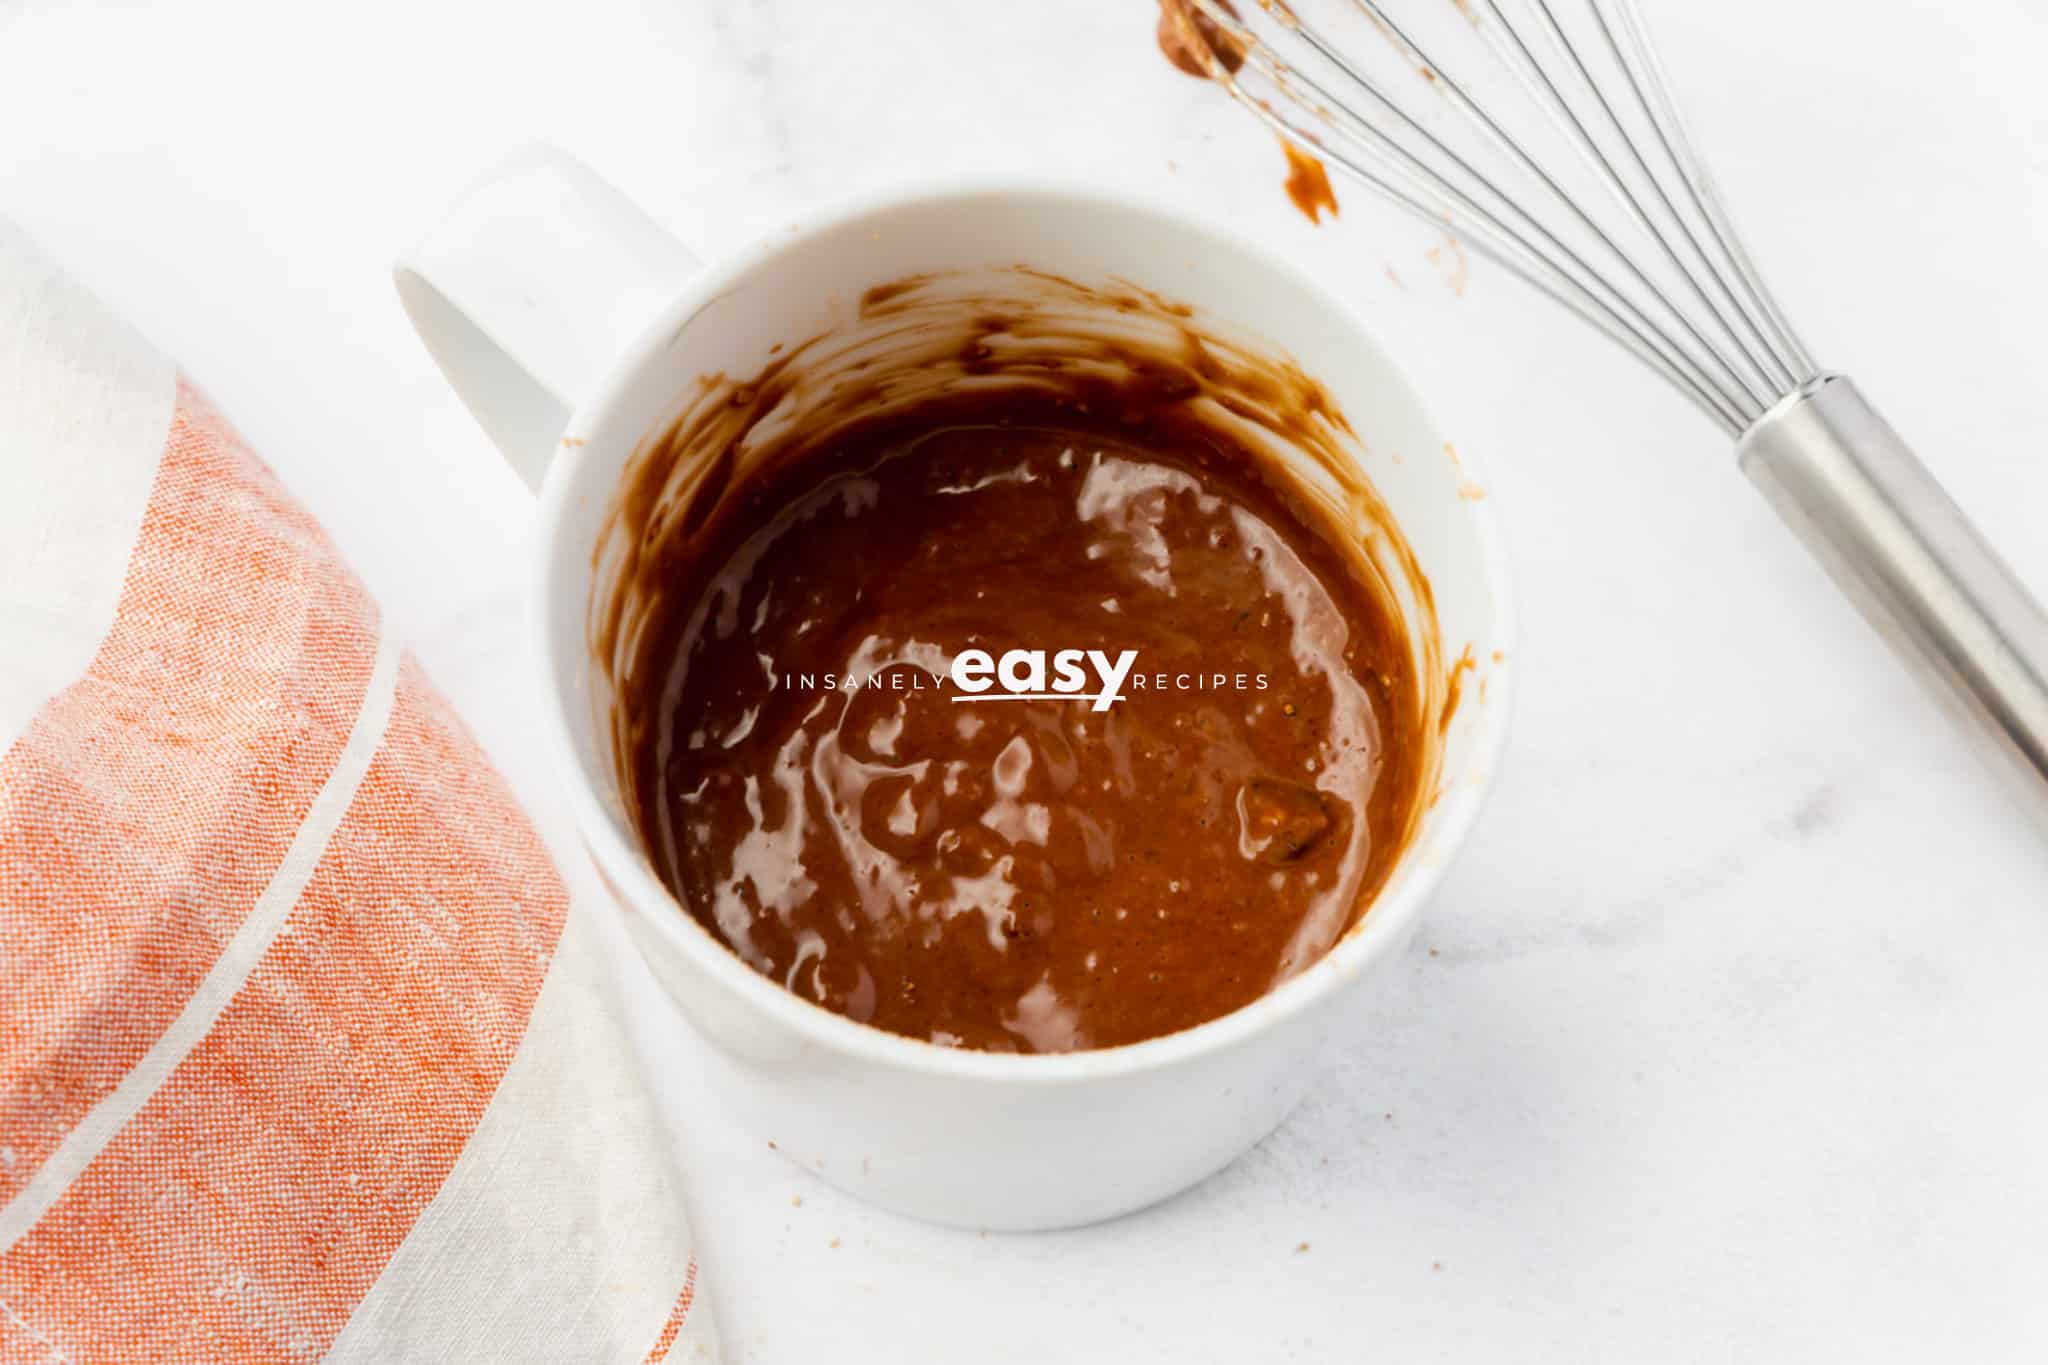 top view photo of a mug with batter to make protein mug cake with a kitchen towel and a wire whisk next to it